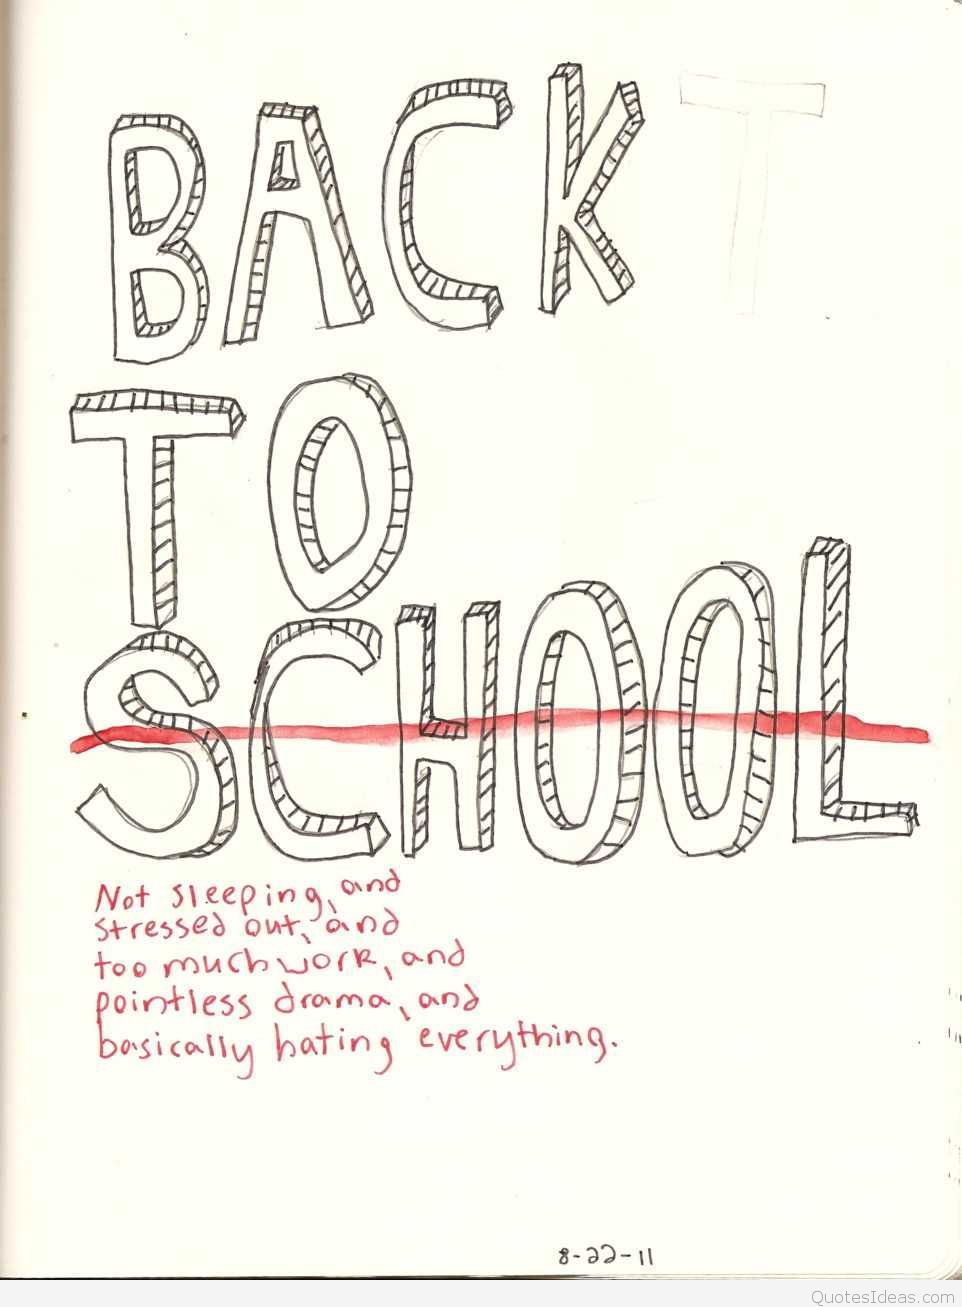 First day of school quotes, picture, sayings, cartoons 2015